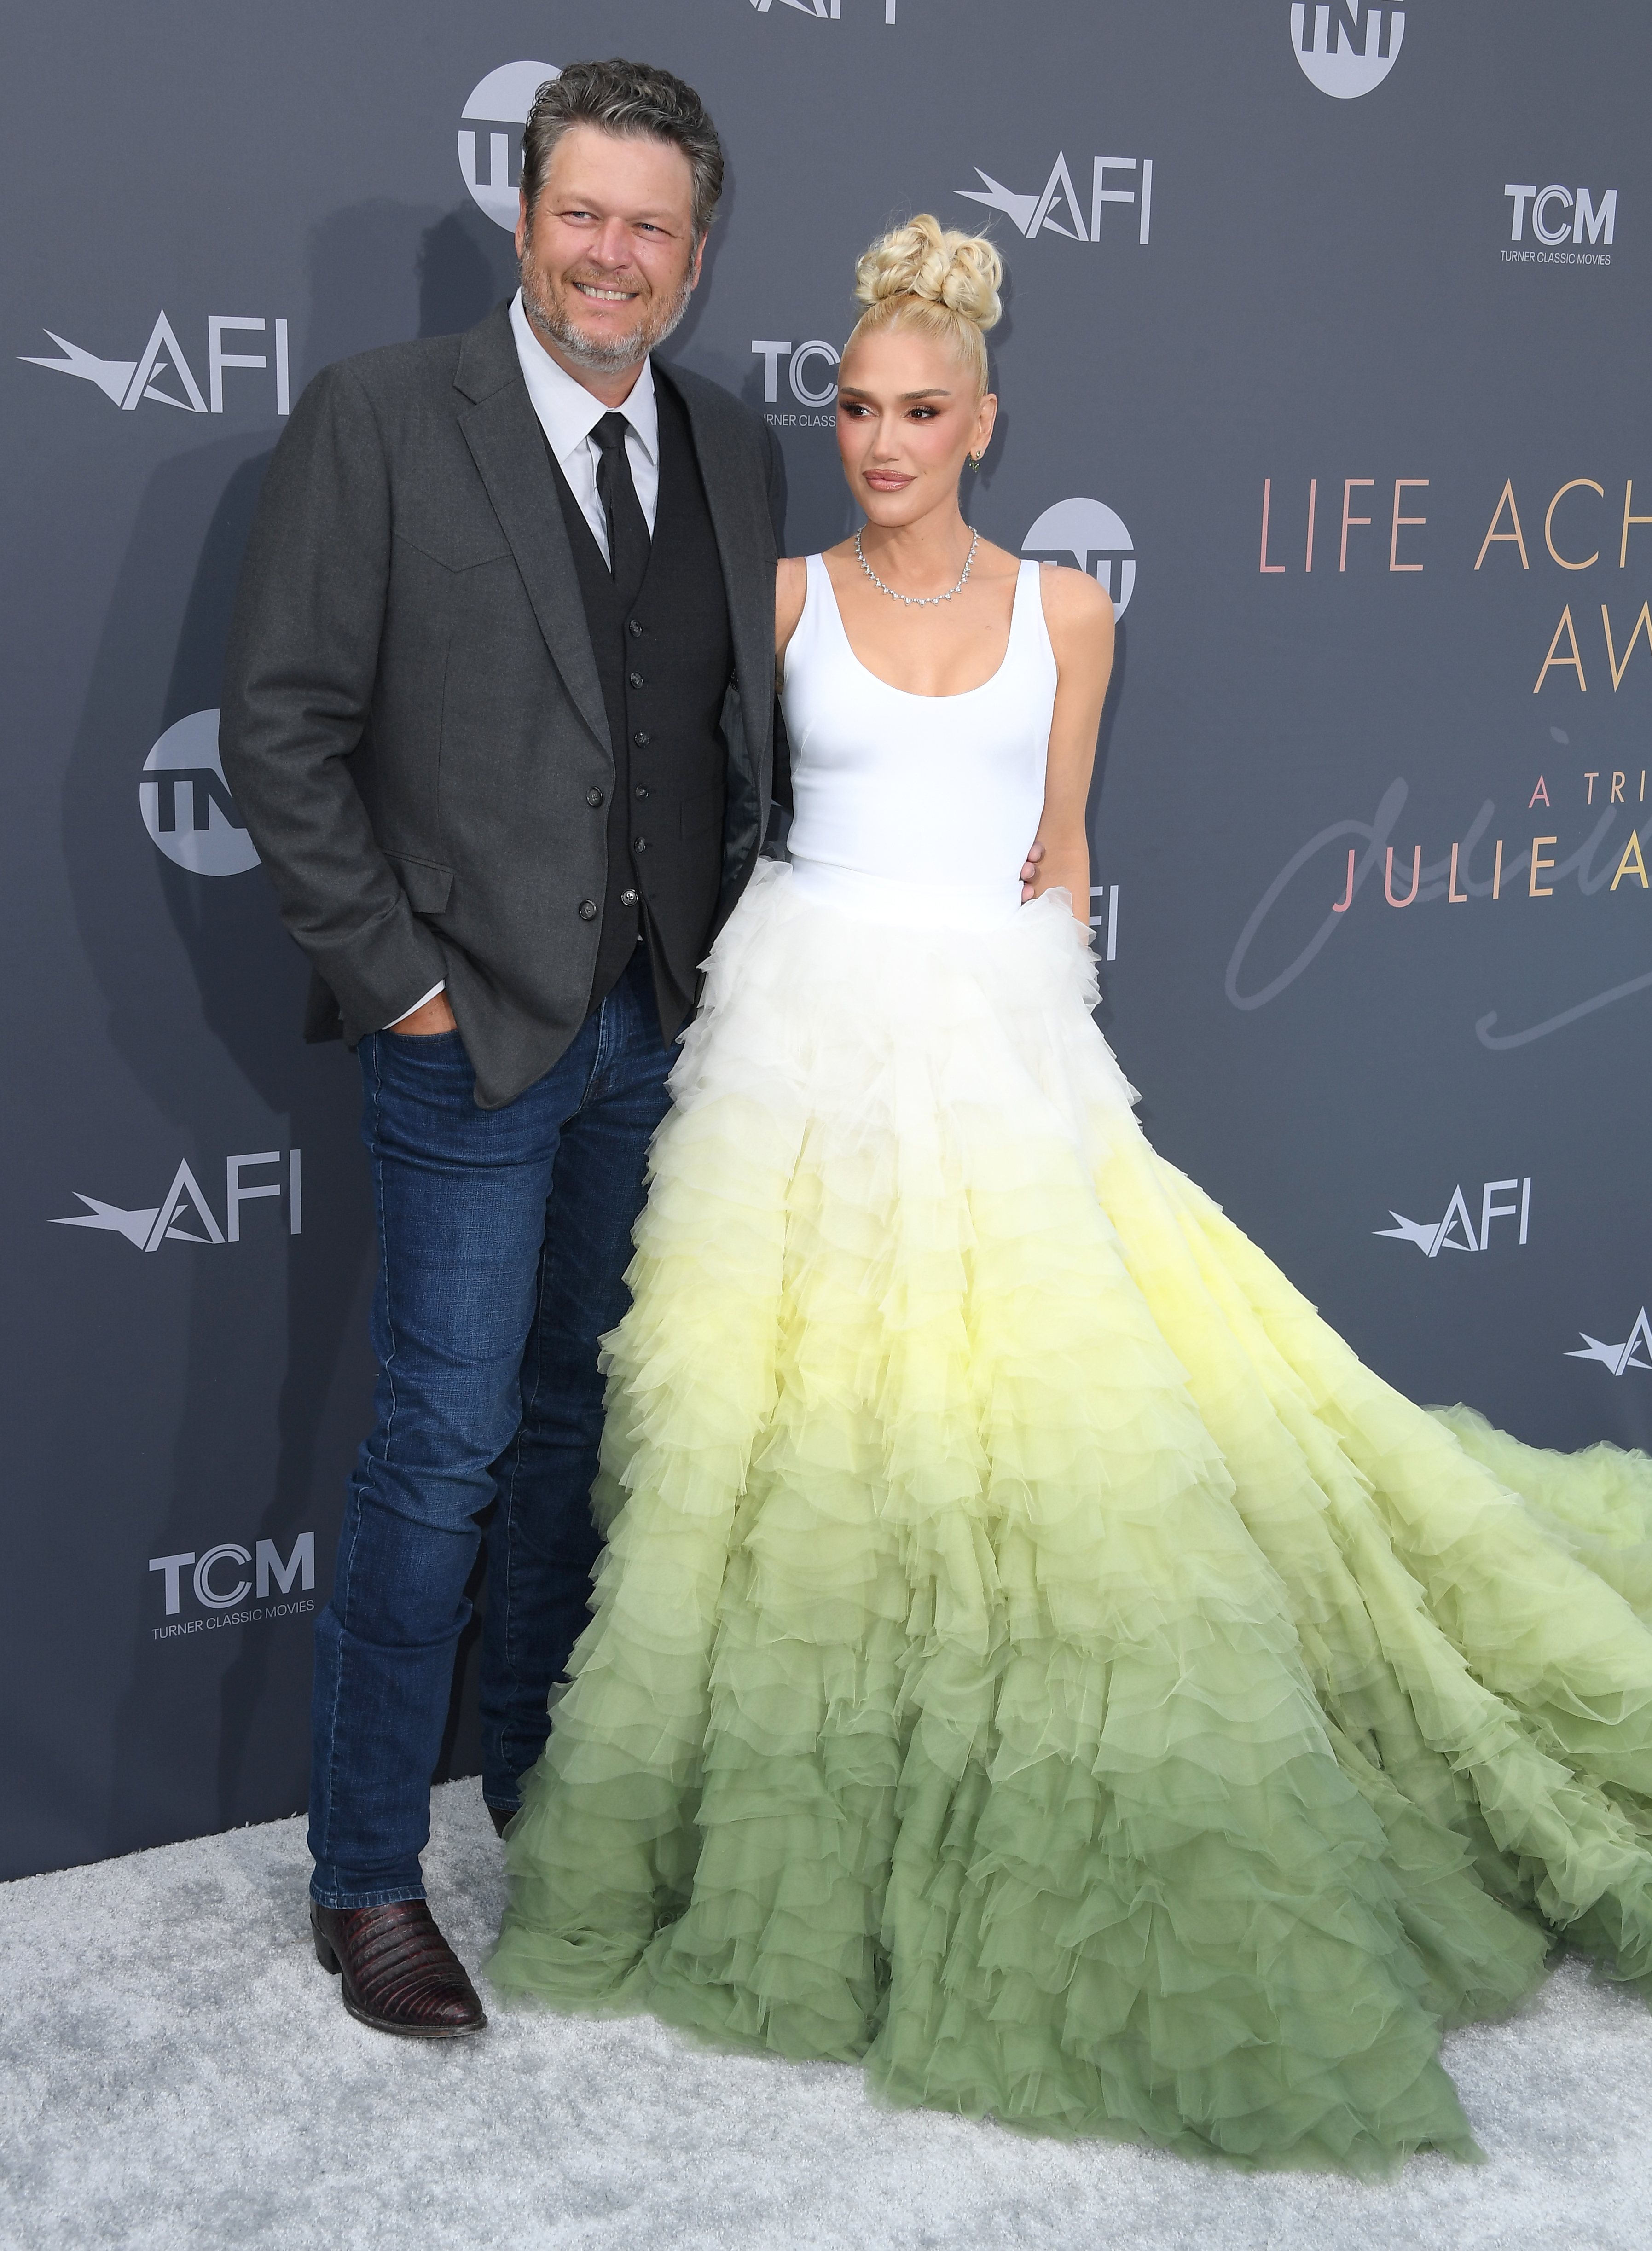 Fans have been speculating possible struggles in the couple's marriage since Blake opted out of The Voice this year